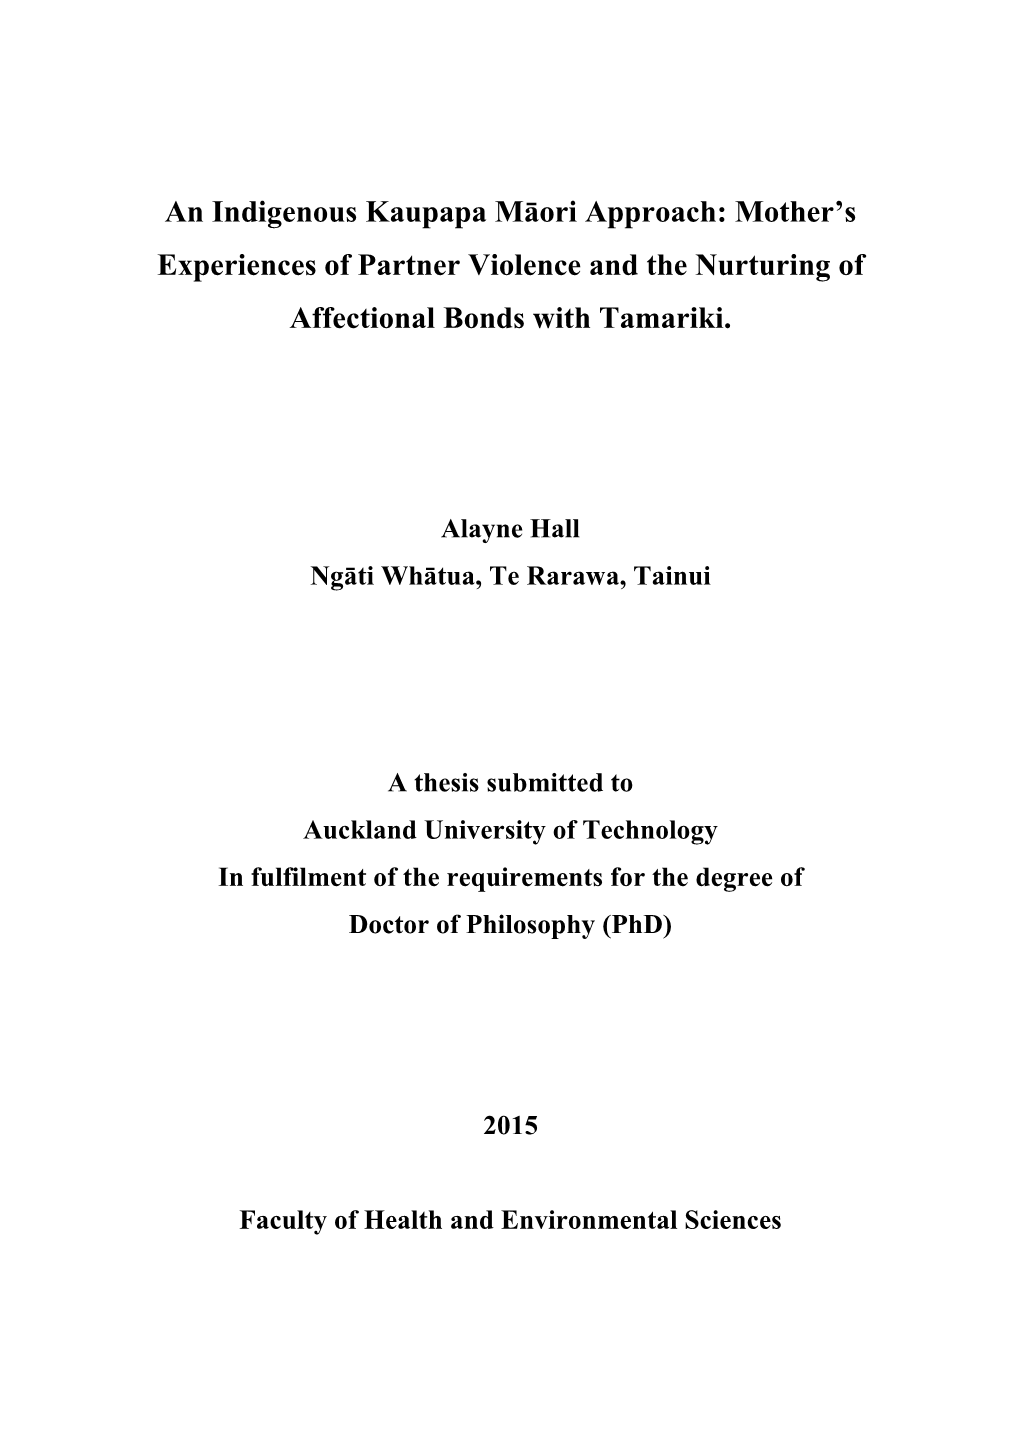 An Indigenous Kaupapa Māori Approach: Mother’S Experiences of Partner Violence and the Nurturing of Affectional Bonds with Tamariki